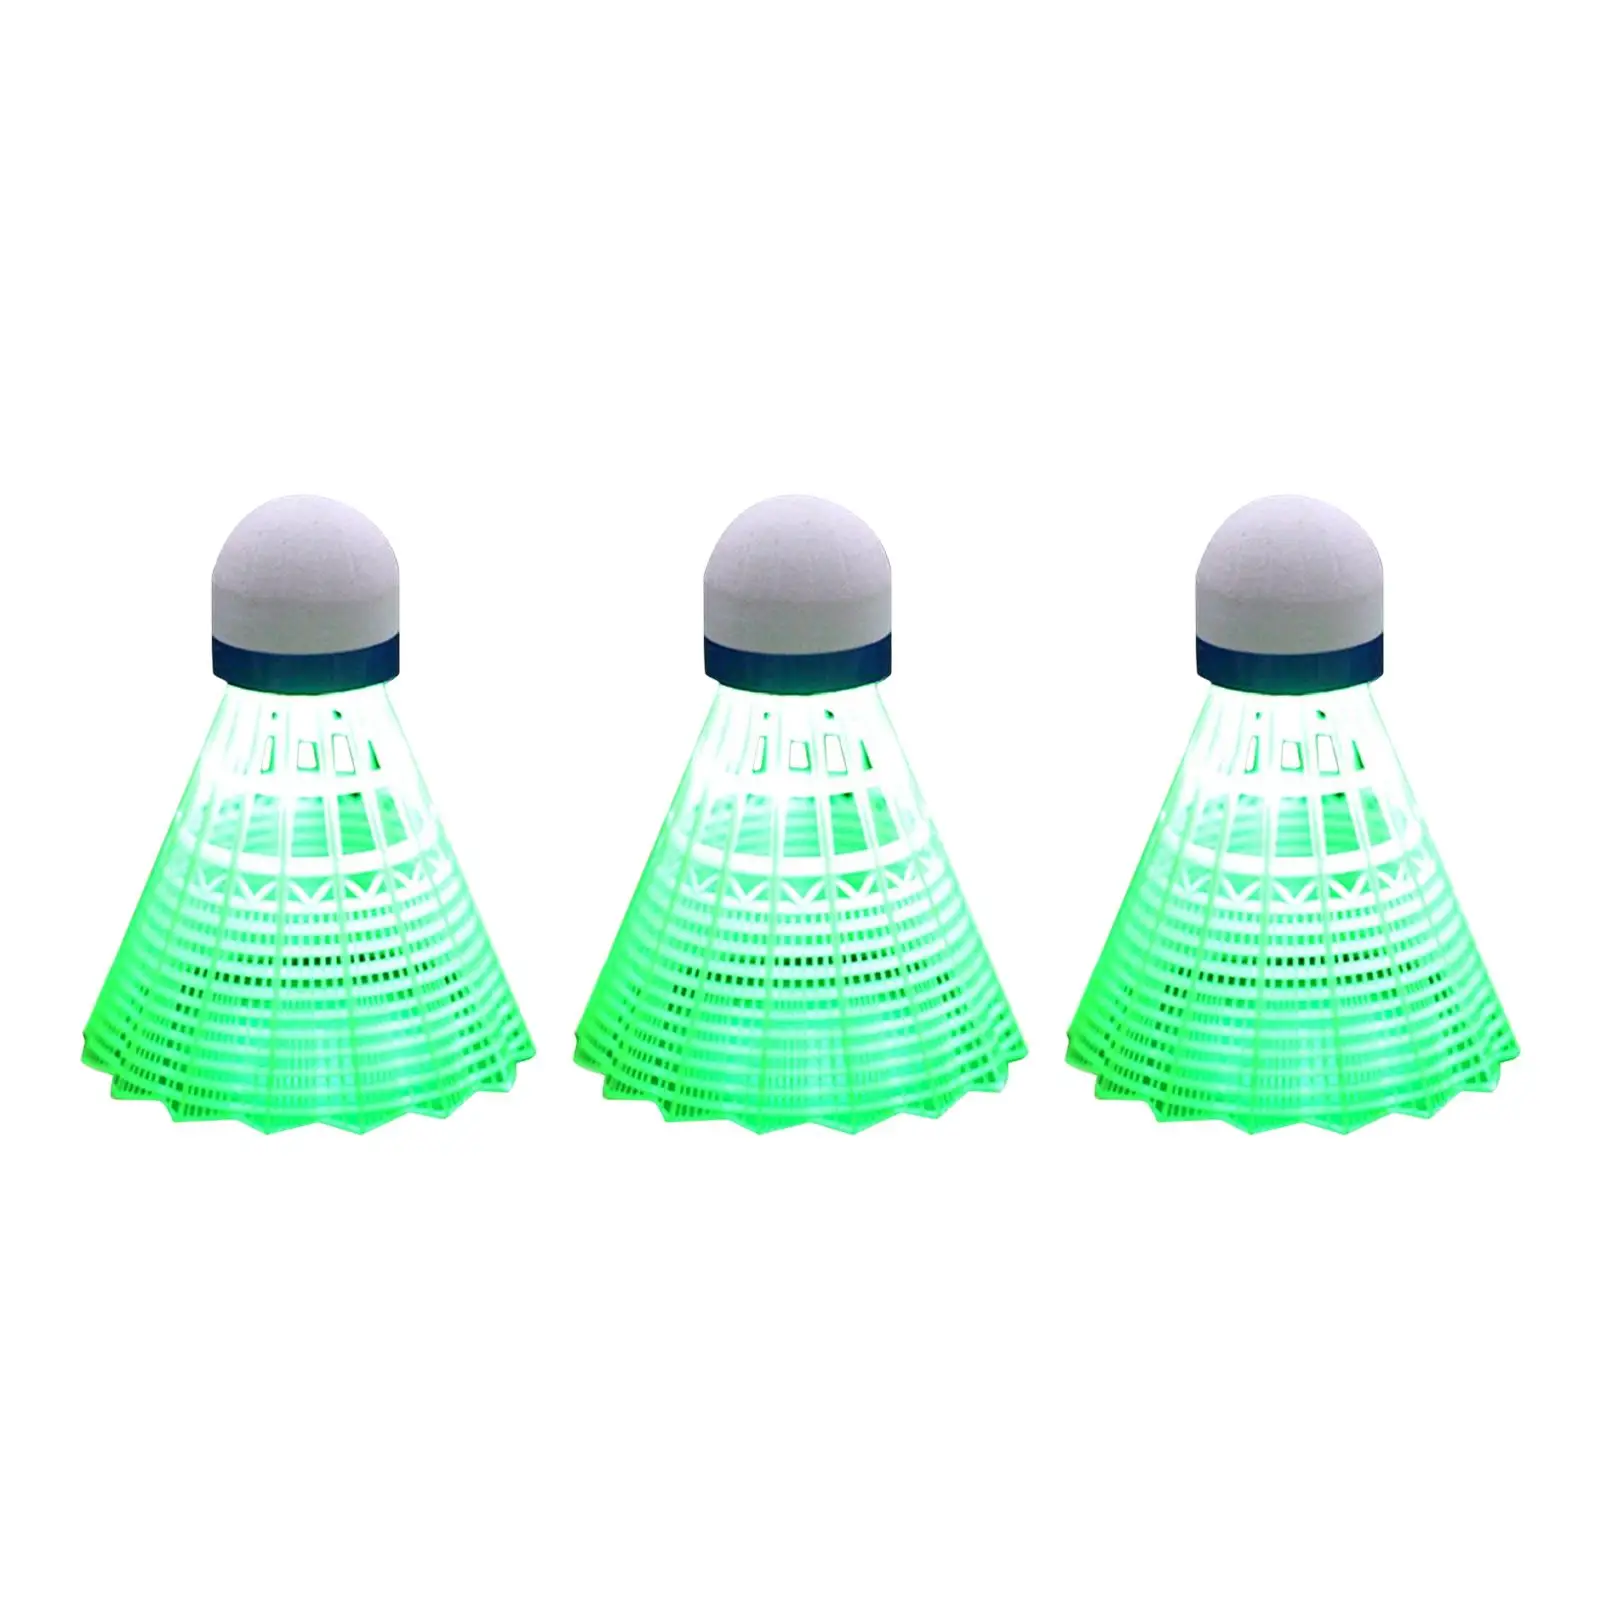 3Pcs Nylon LED Badminton Shuttlecocks Light up Birdies Great Stability for Game Outdoor Indoor Sports Activities Fitness Yard